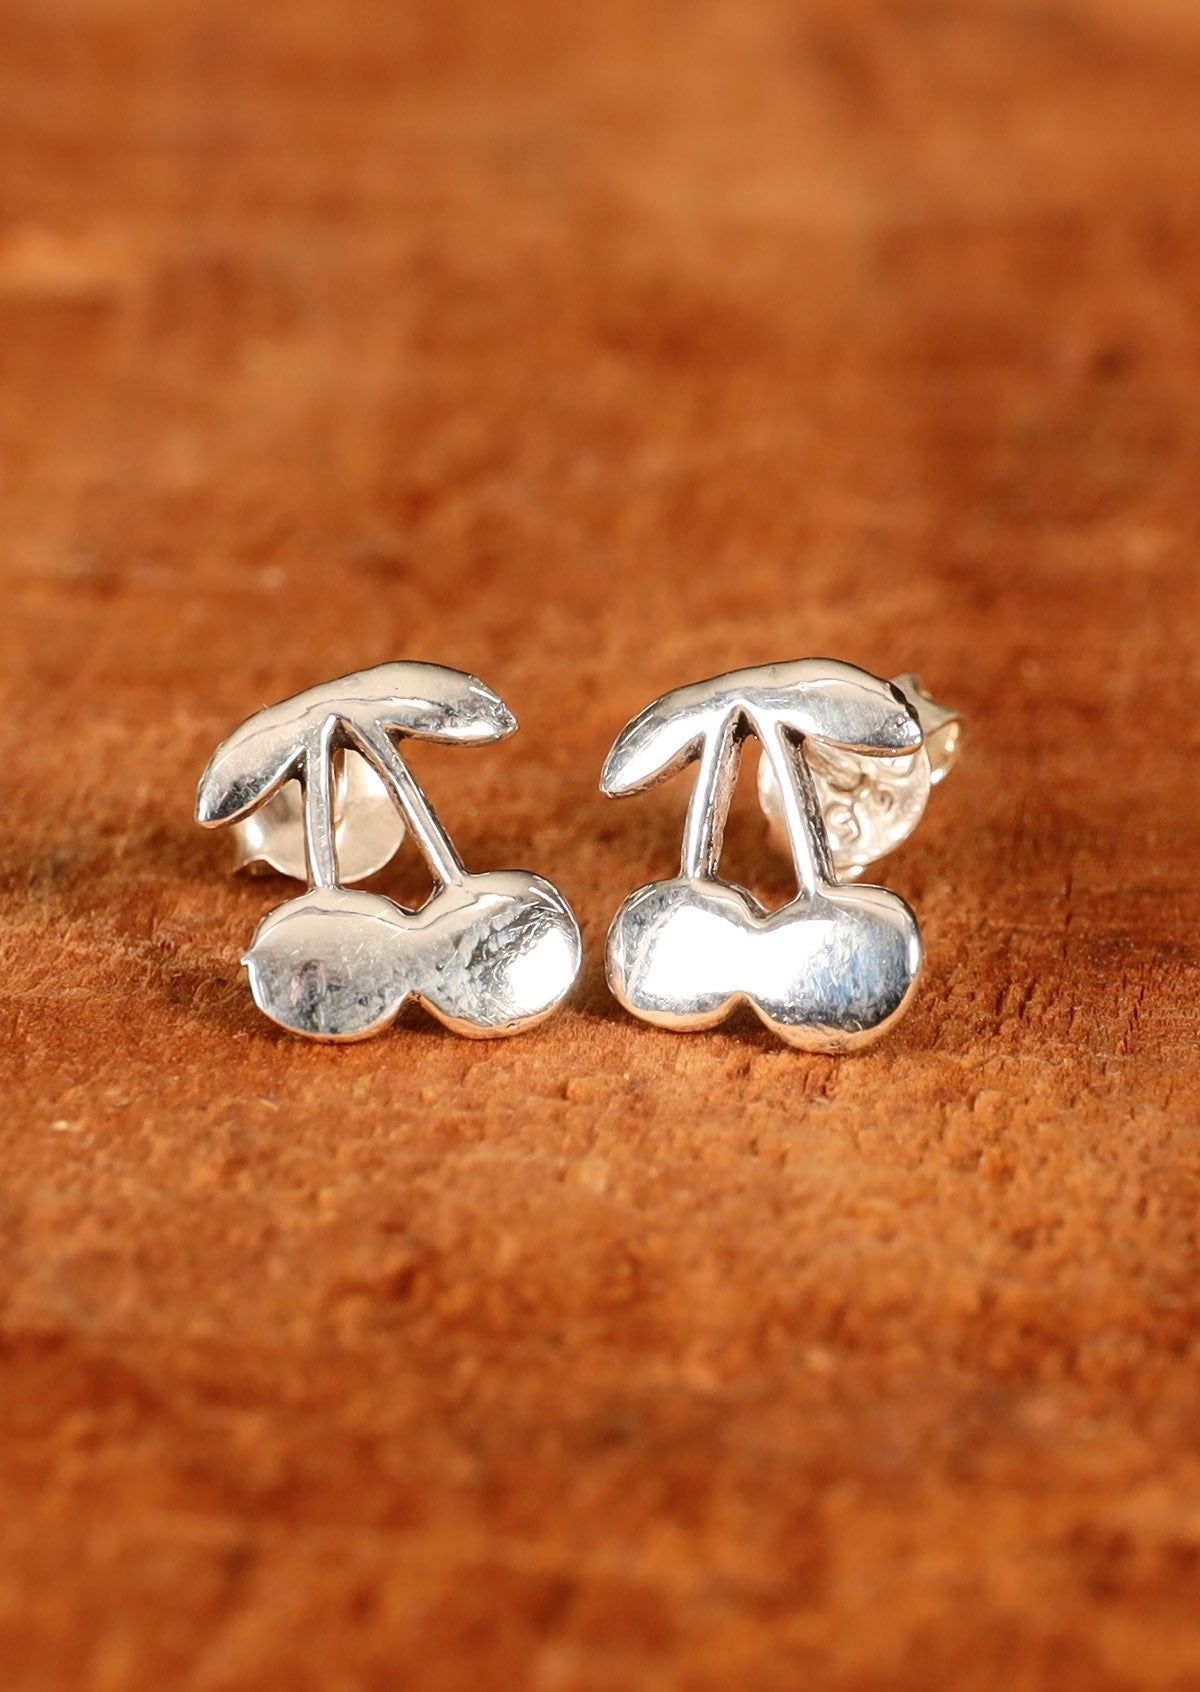 92.5% silver cherry shaped earrings on wood for display.